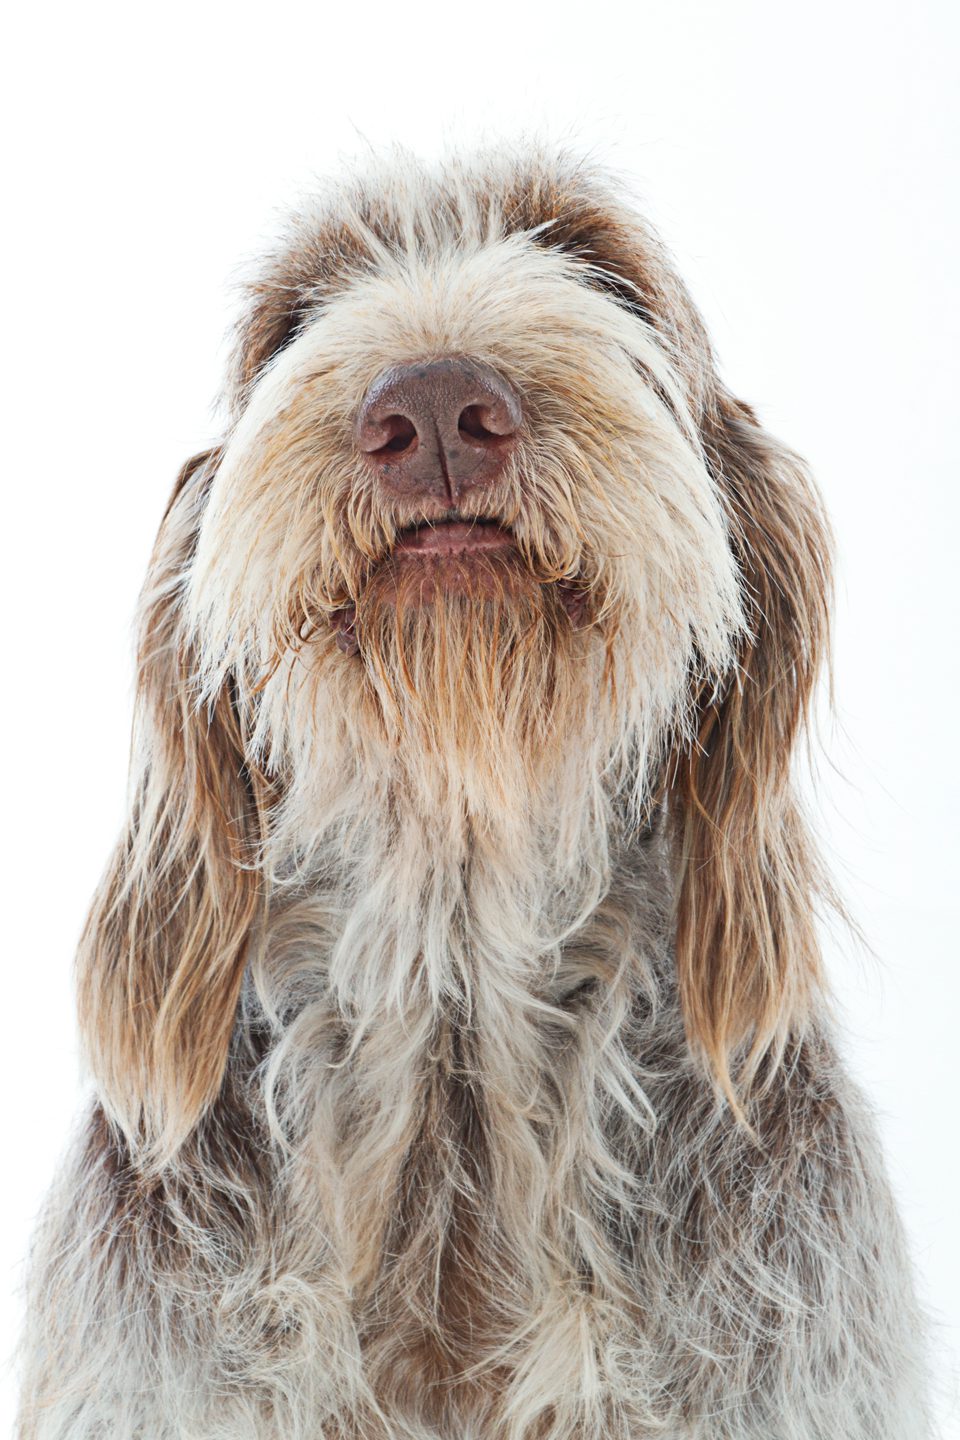 spinone looking almost human